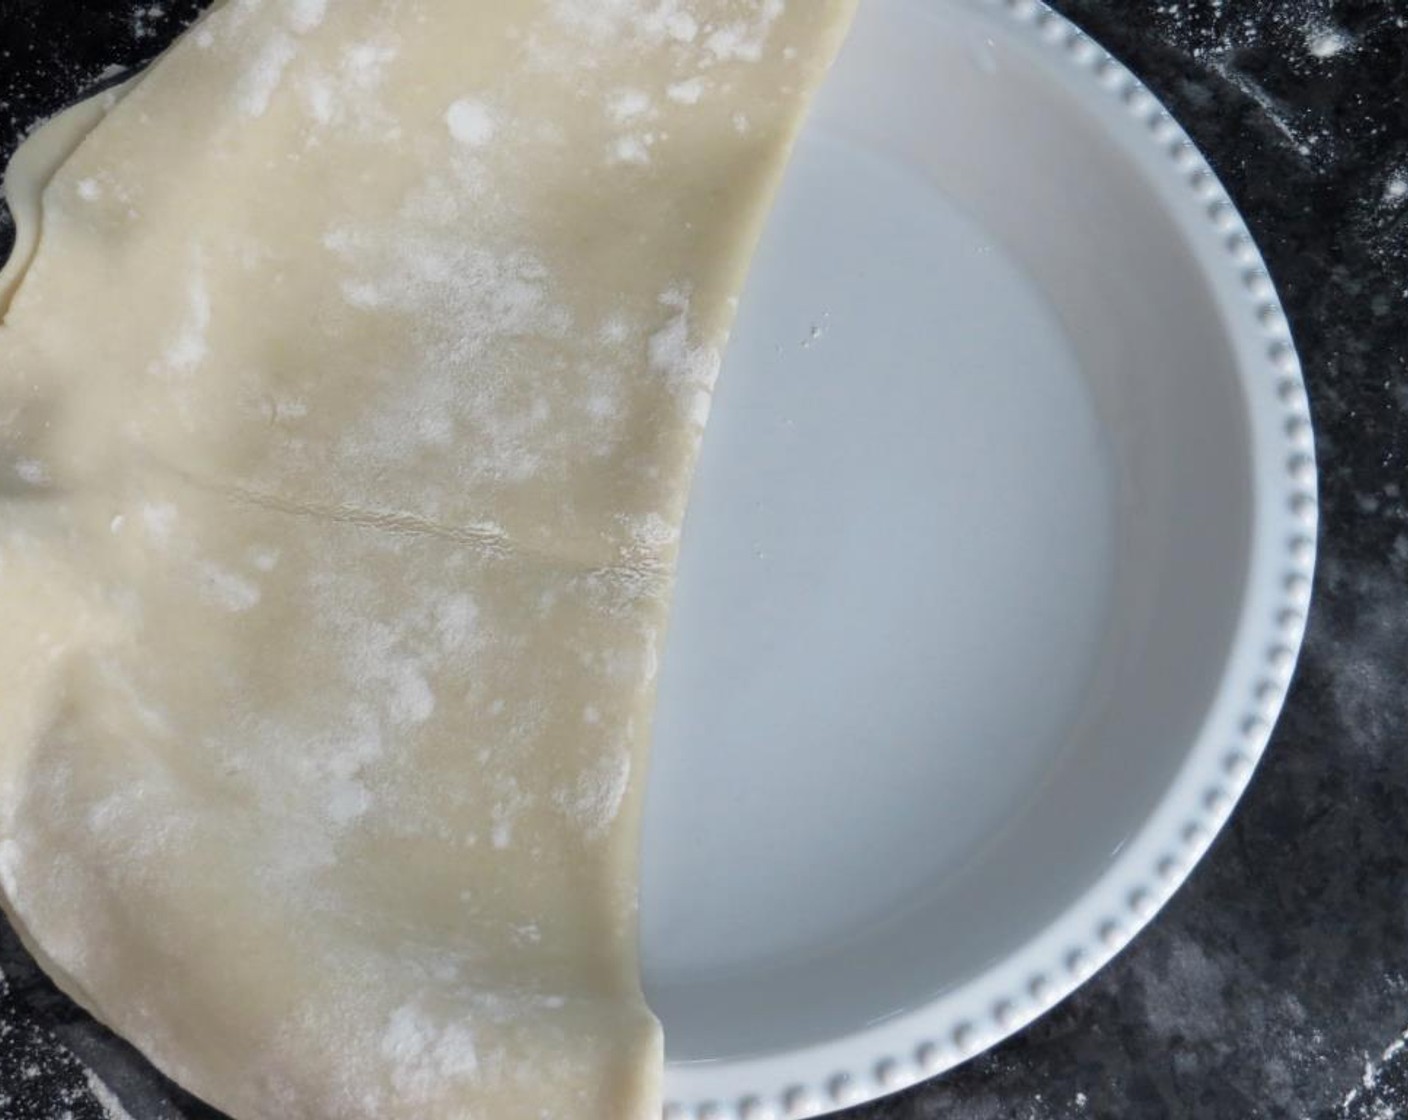 step 4 Transfer crust to pie plate. Trim off any excess crust that hangs beyond 1/4" over the edges.